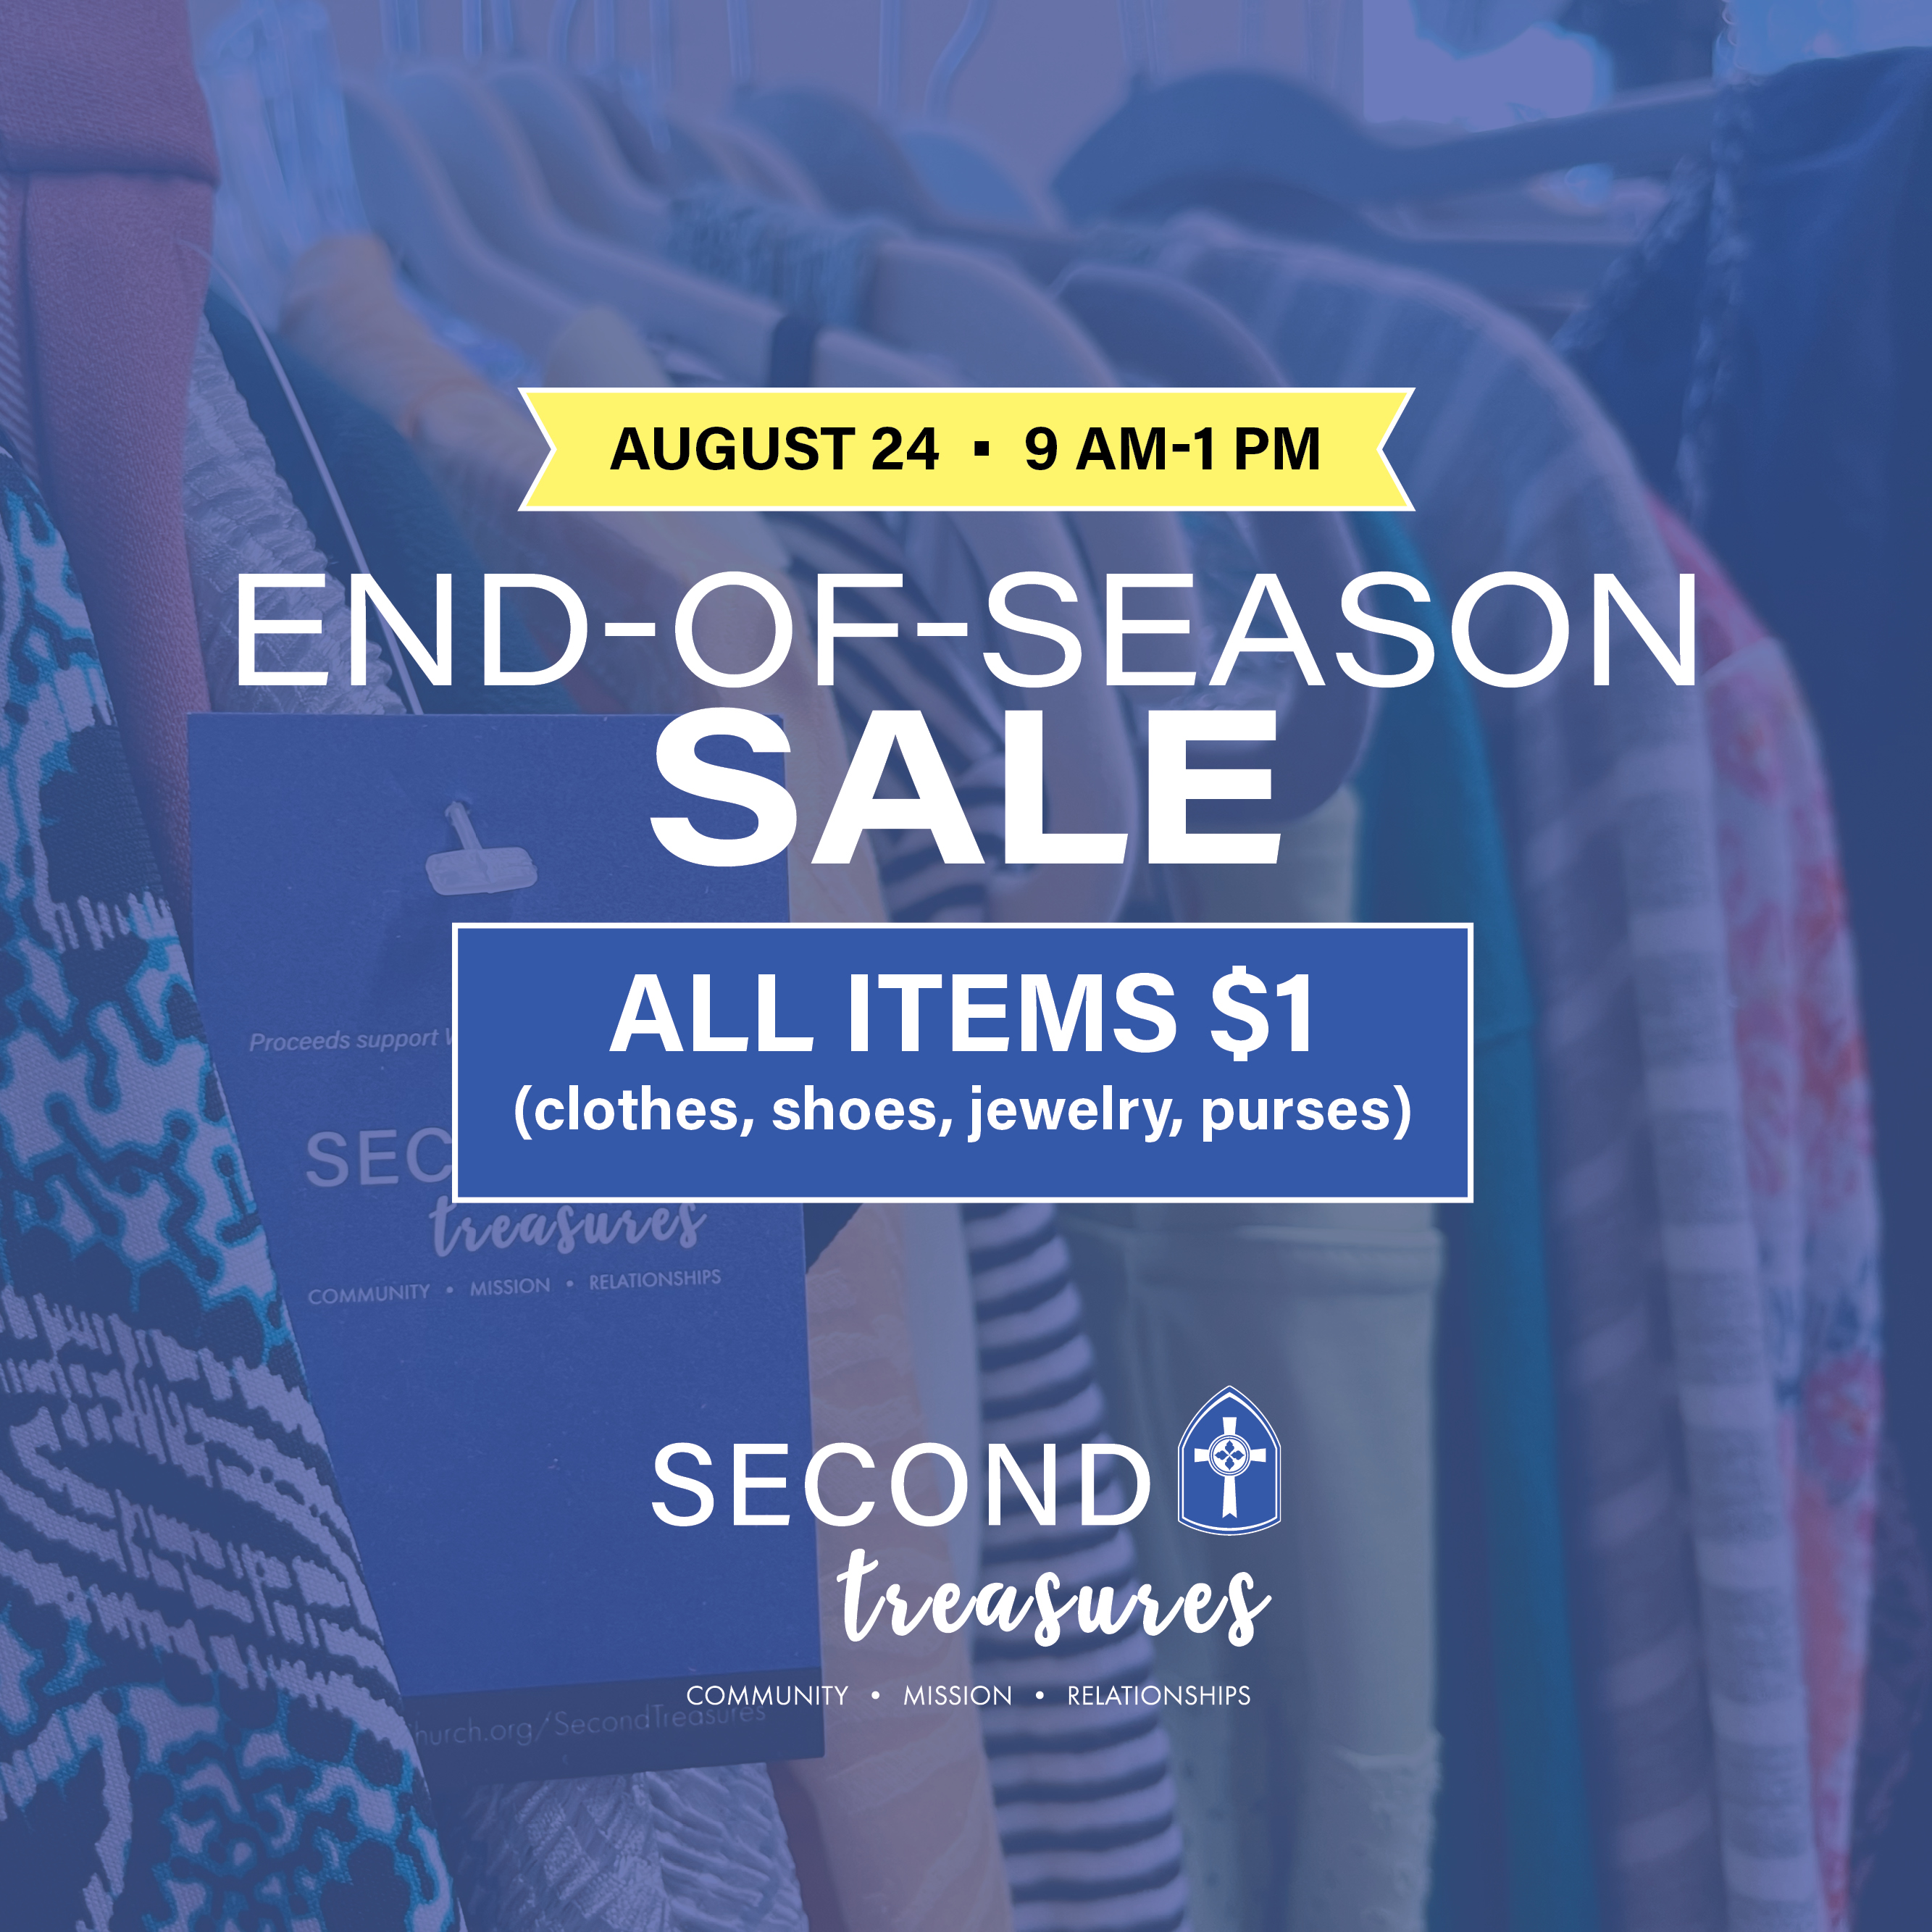 Second Treasures End of Season Sale
August 24, 9 AM – 1 PM, Second Treasures
All items for $1!
